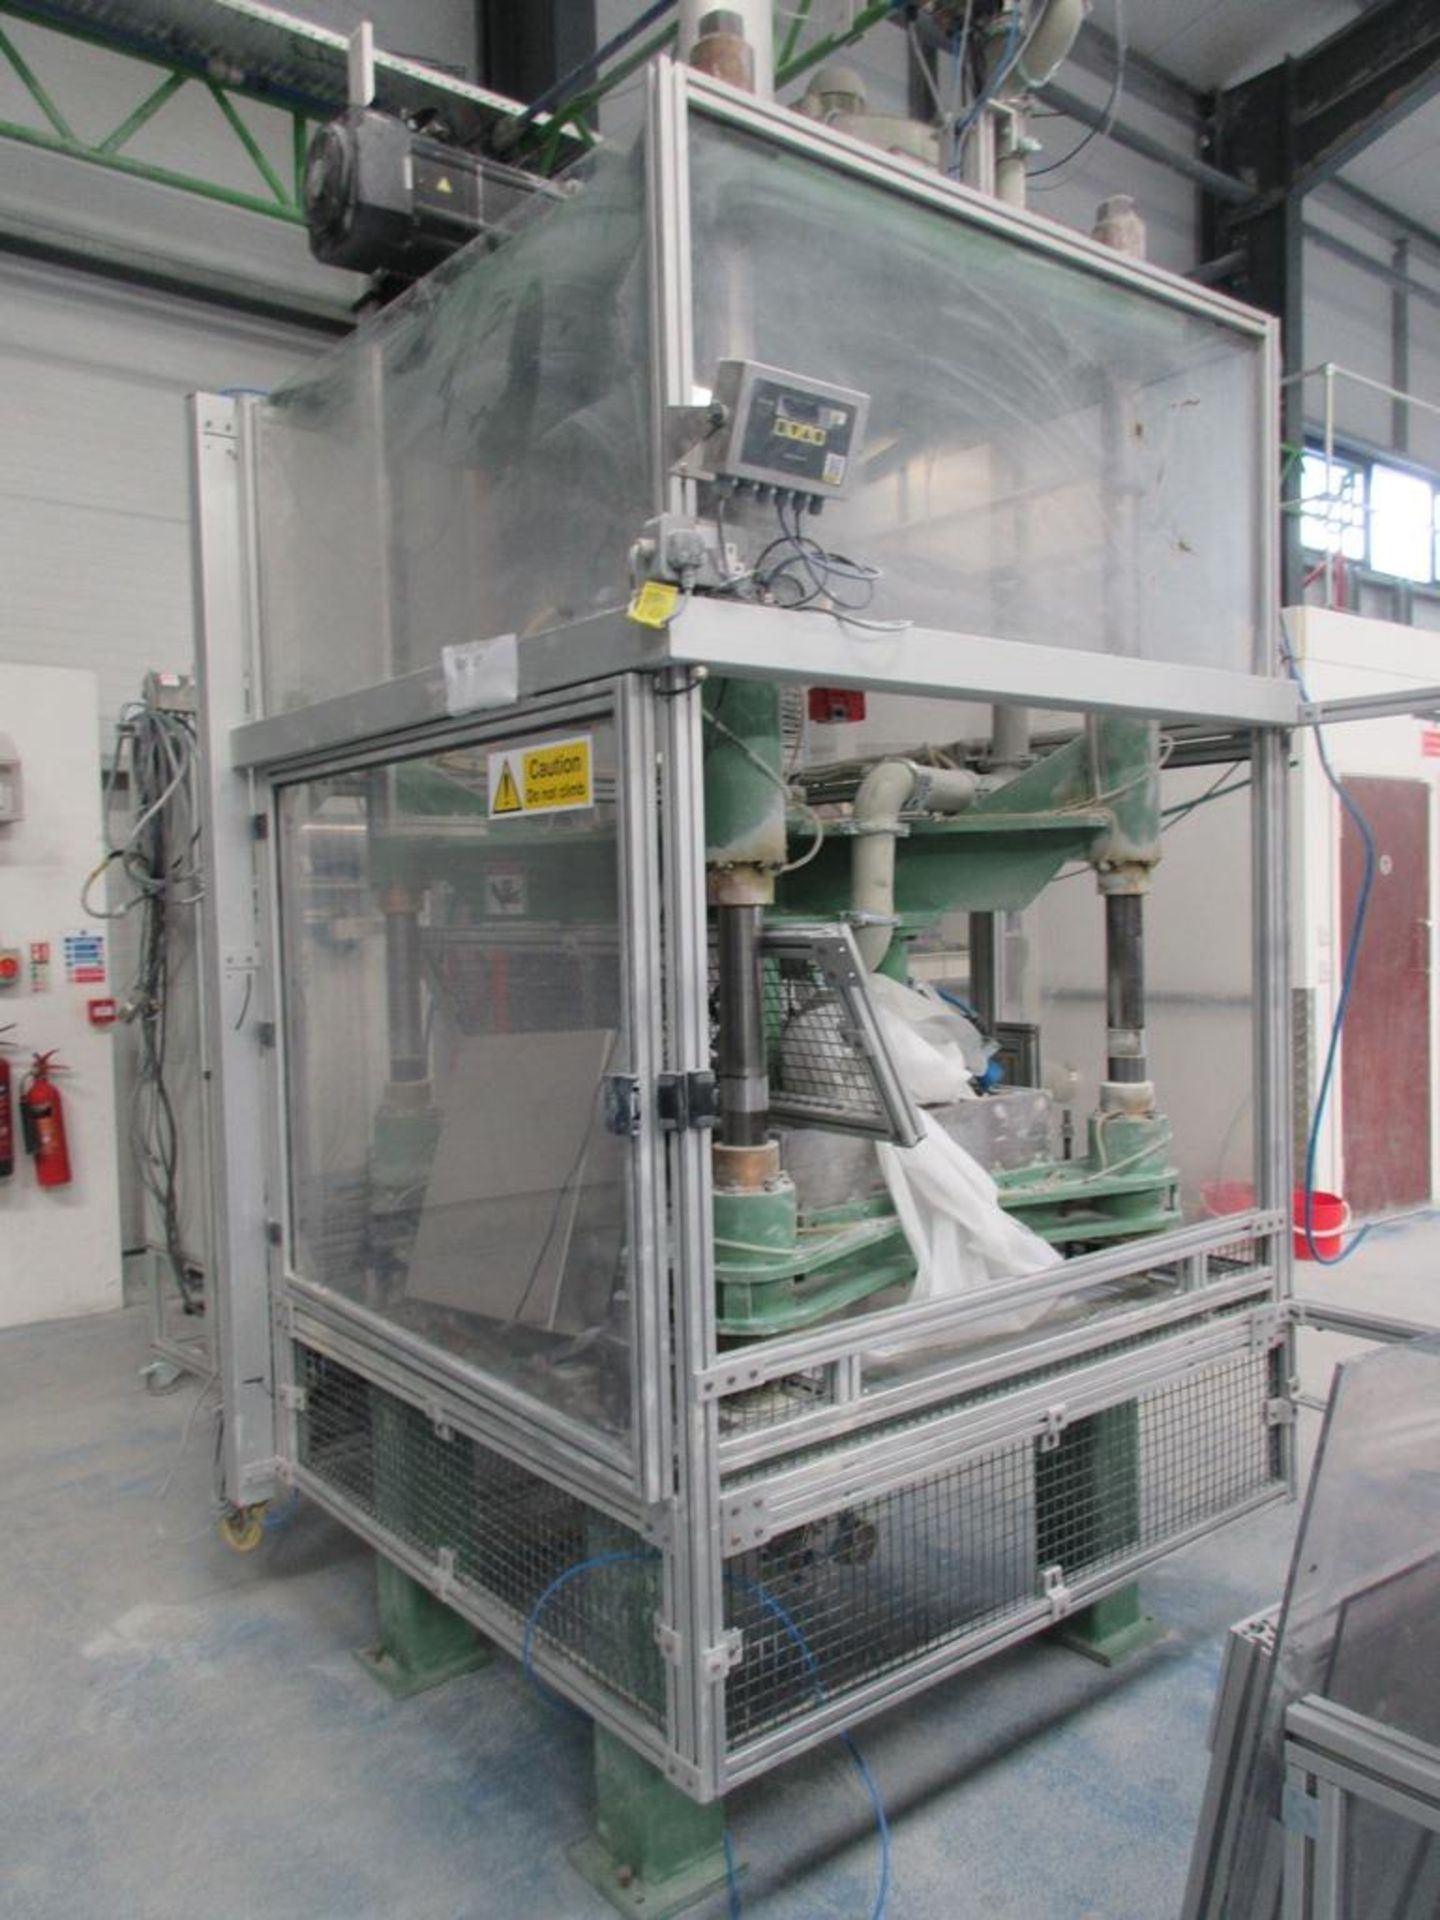 Gasbarre insulation board, 28 tonne electric press, serial no. 20201571, bed size 680 x 980mm, - Image 2 of 12